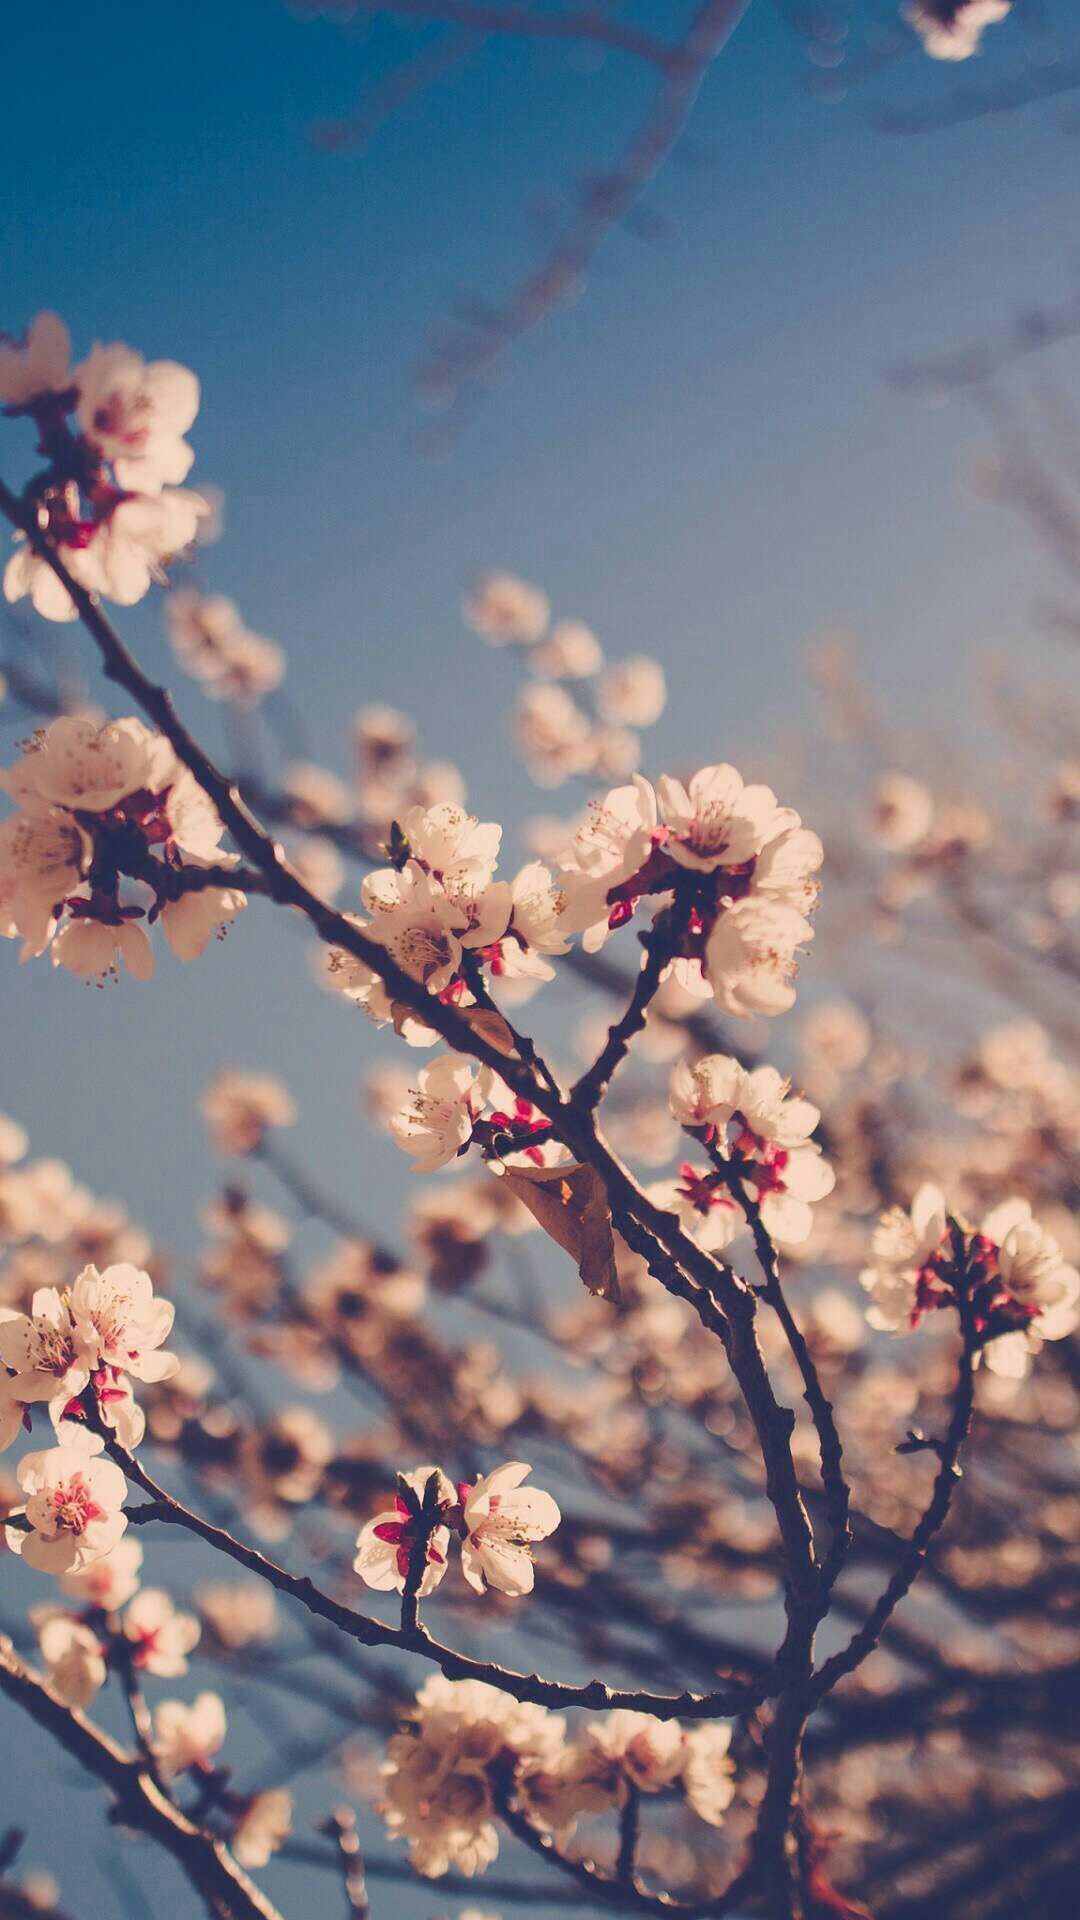 15 Outstanding spring wallpaper aesthetic iphone You Can Save It